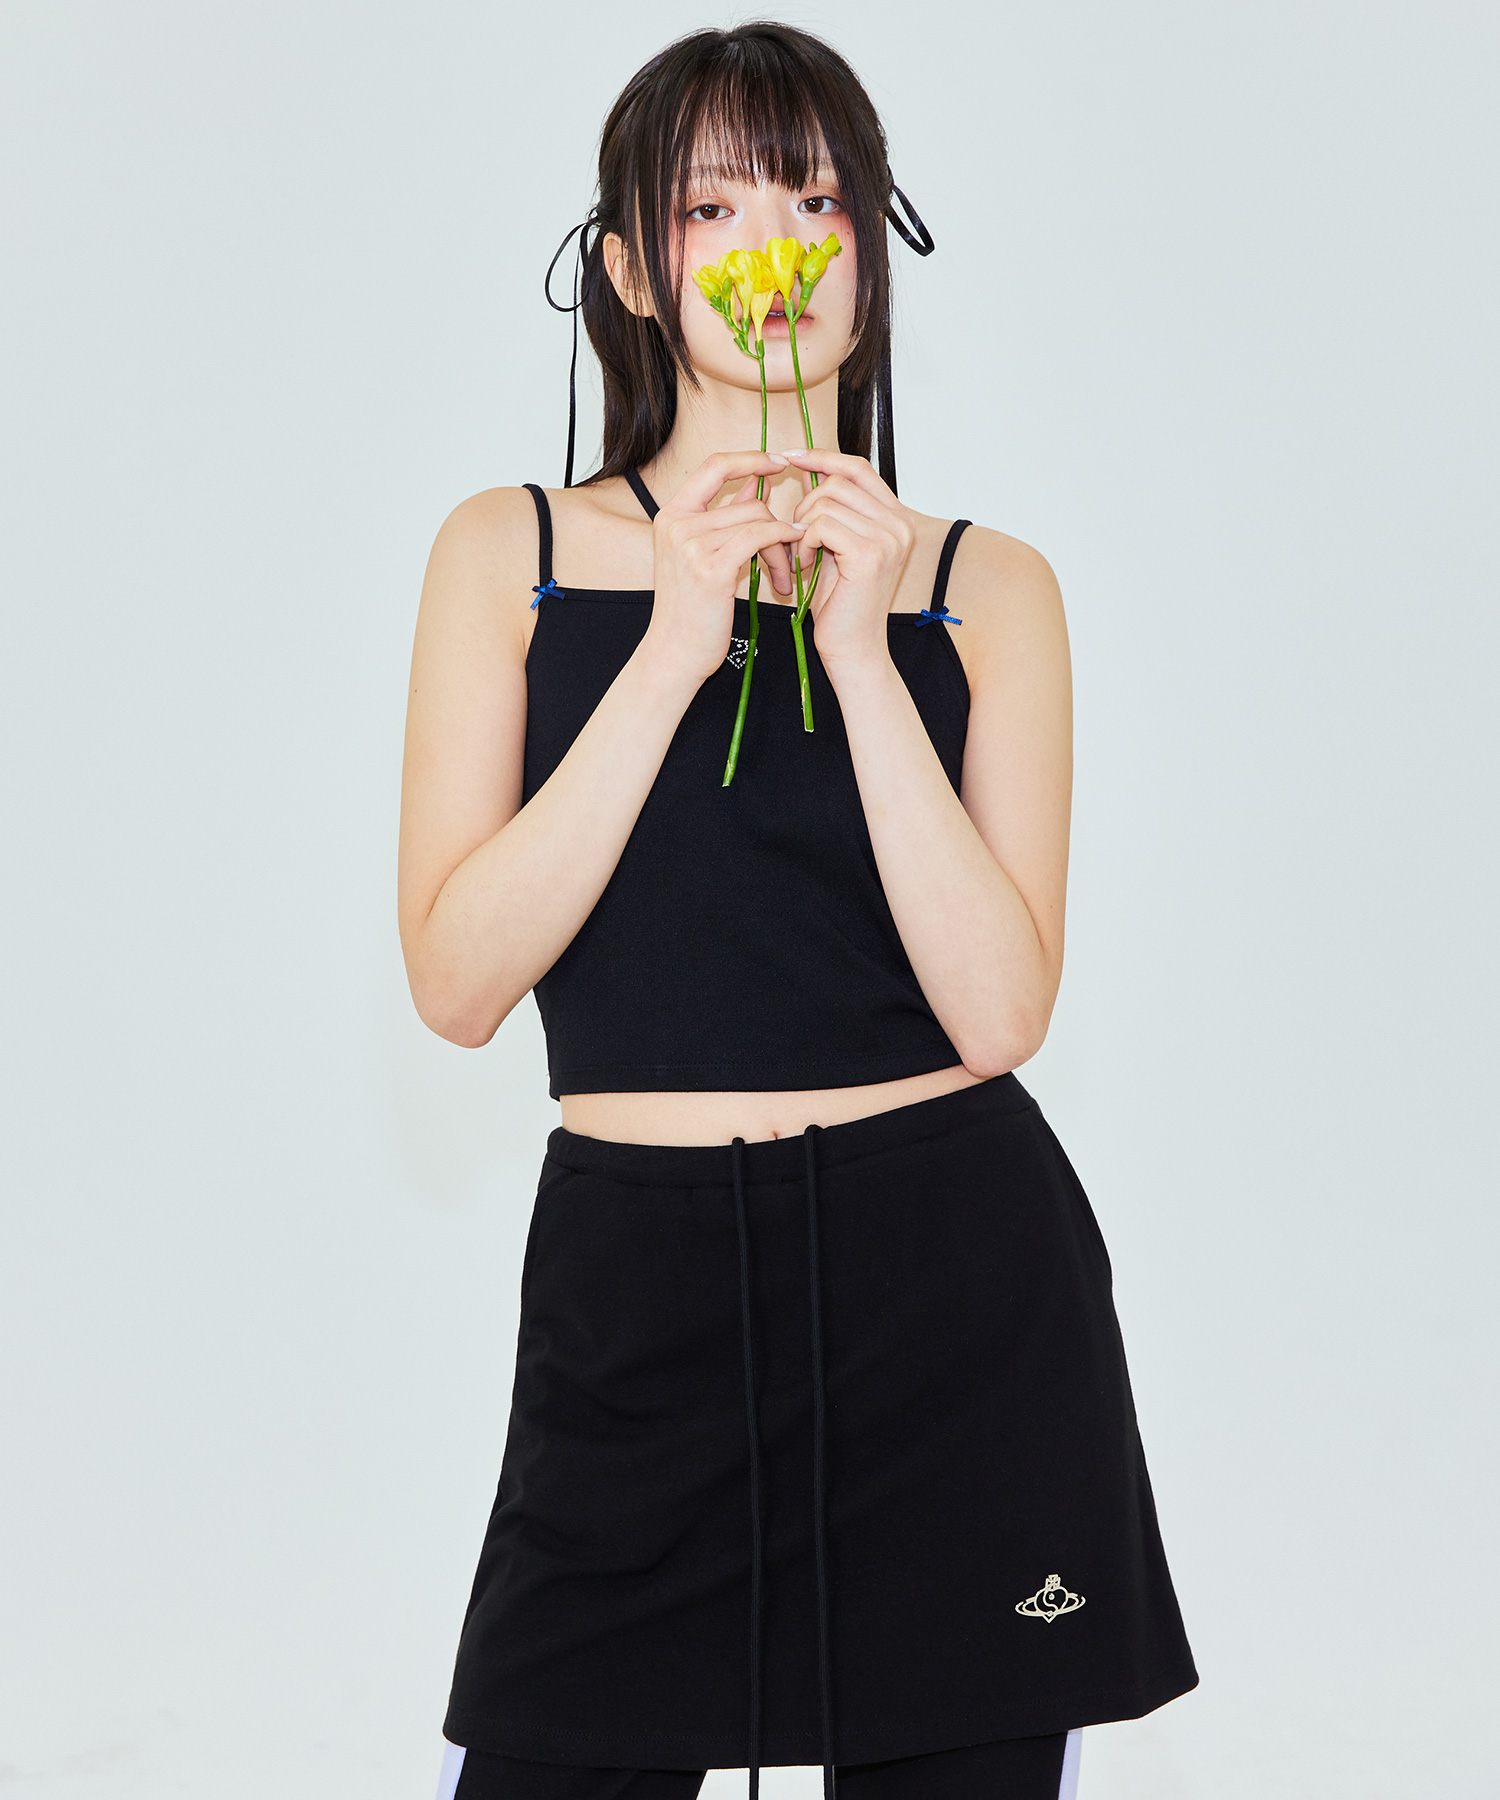 FANCY TOP IN BLACK pre-order delivery on May 31st.